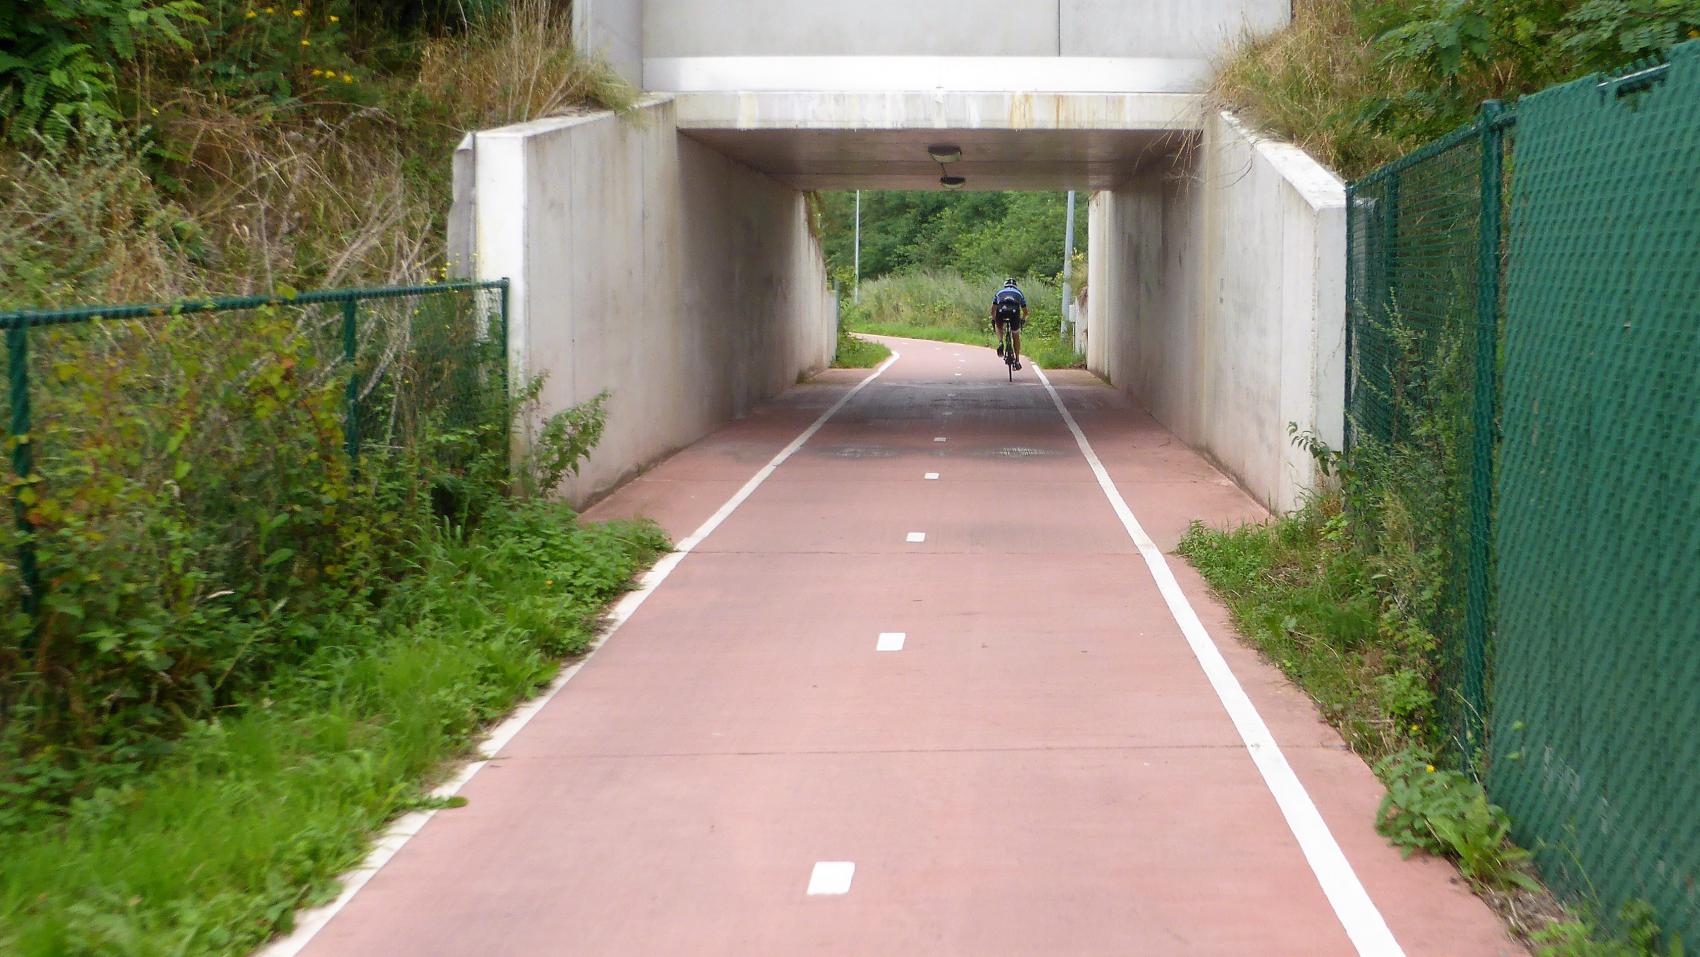 Median and edge markings on both sides on the Antwerp – Brussels (F1) cycle highway. Note the clearance between edge markings and tunnel walls.